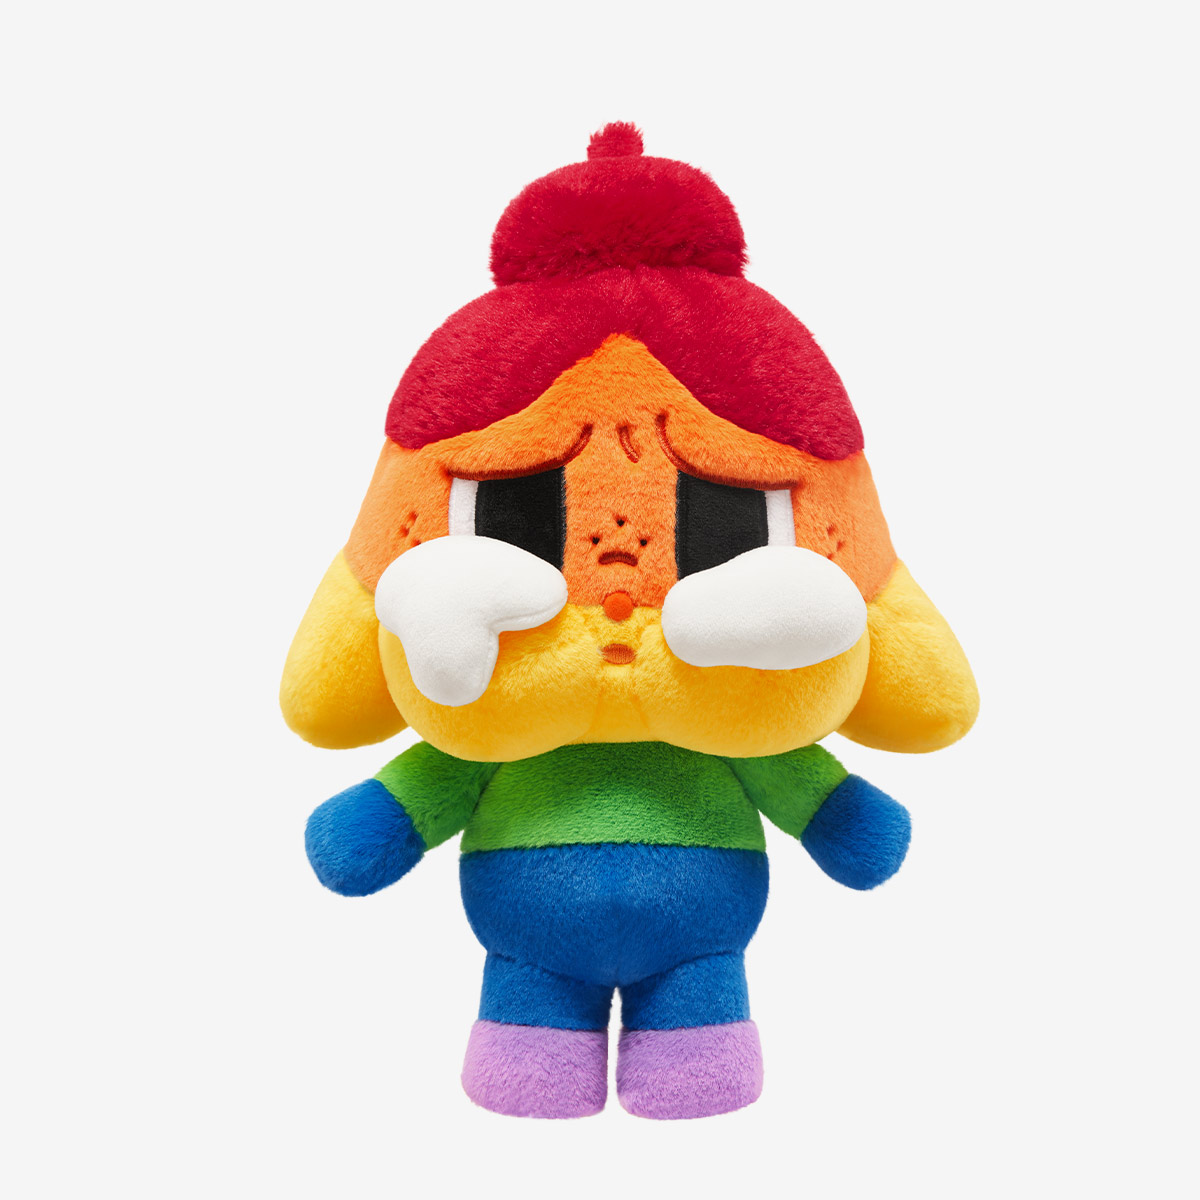 CRYBABY CHEER UP, BABY! SERIES-Plush Doll-Copy - POP MART (South 